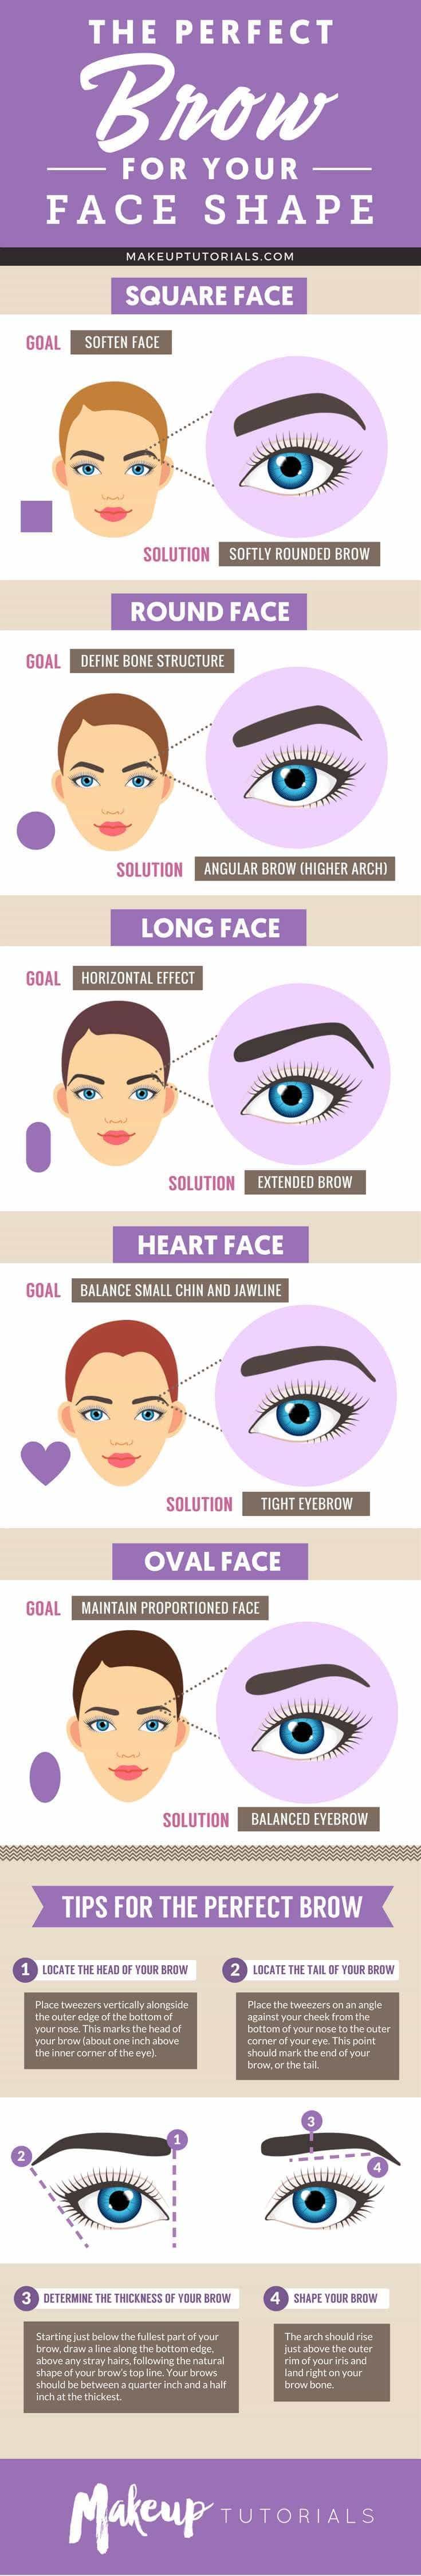 Eyebrow Tutorial: Finding The Right Brow Shape For Your Face...